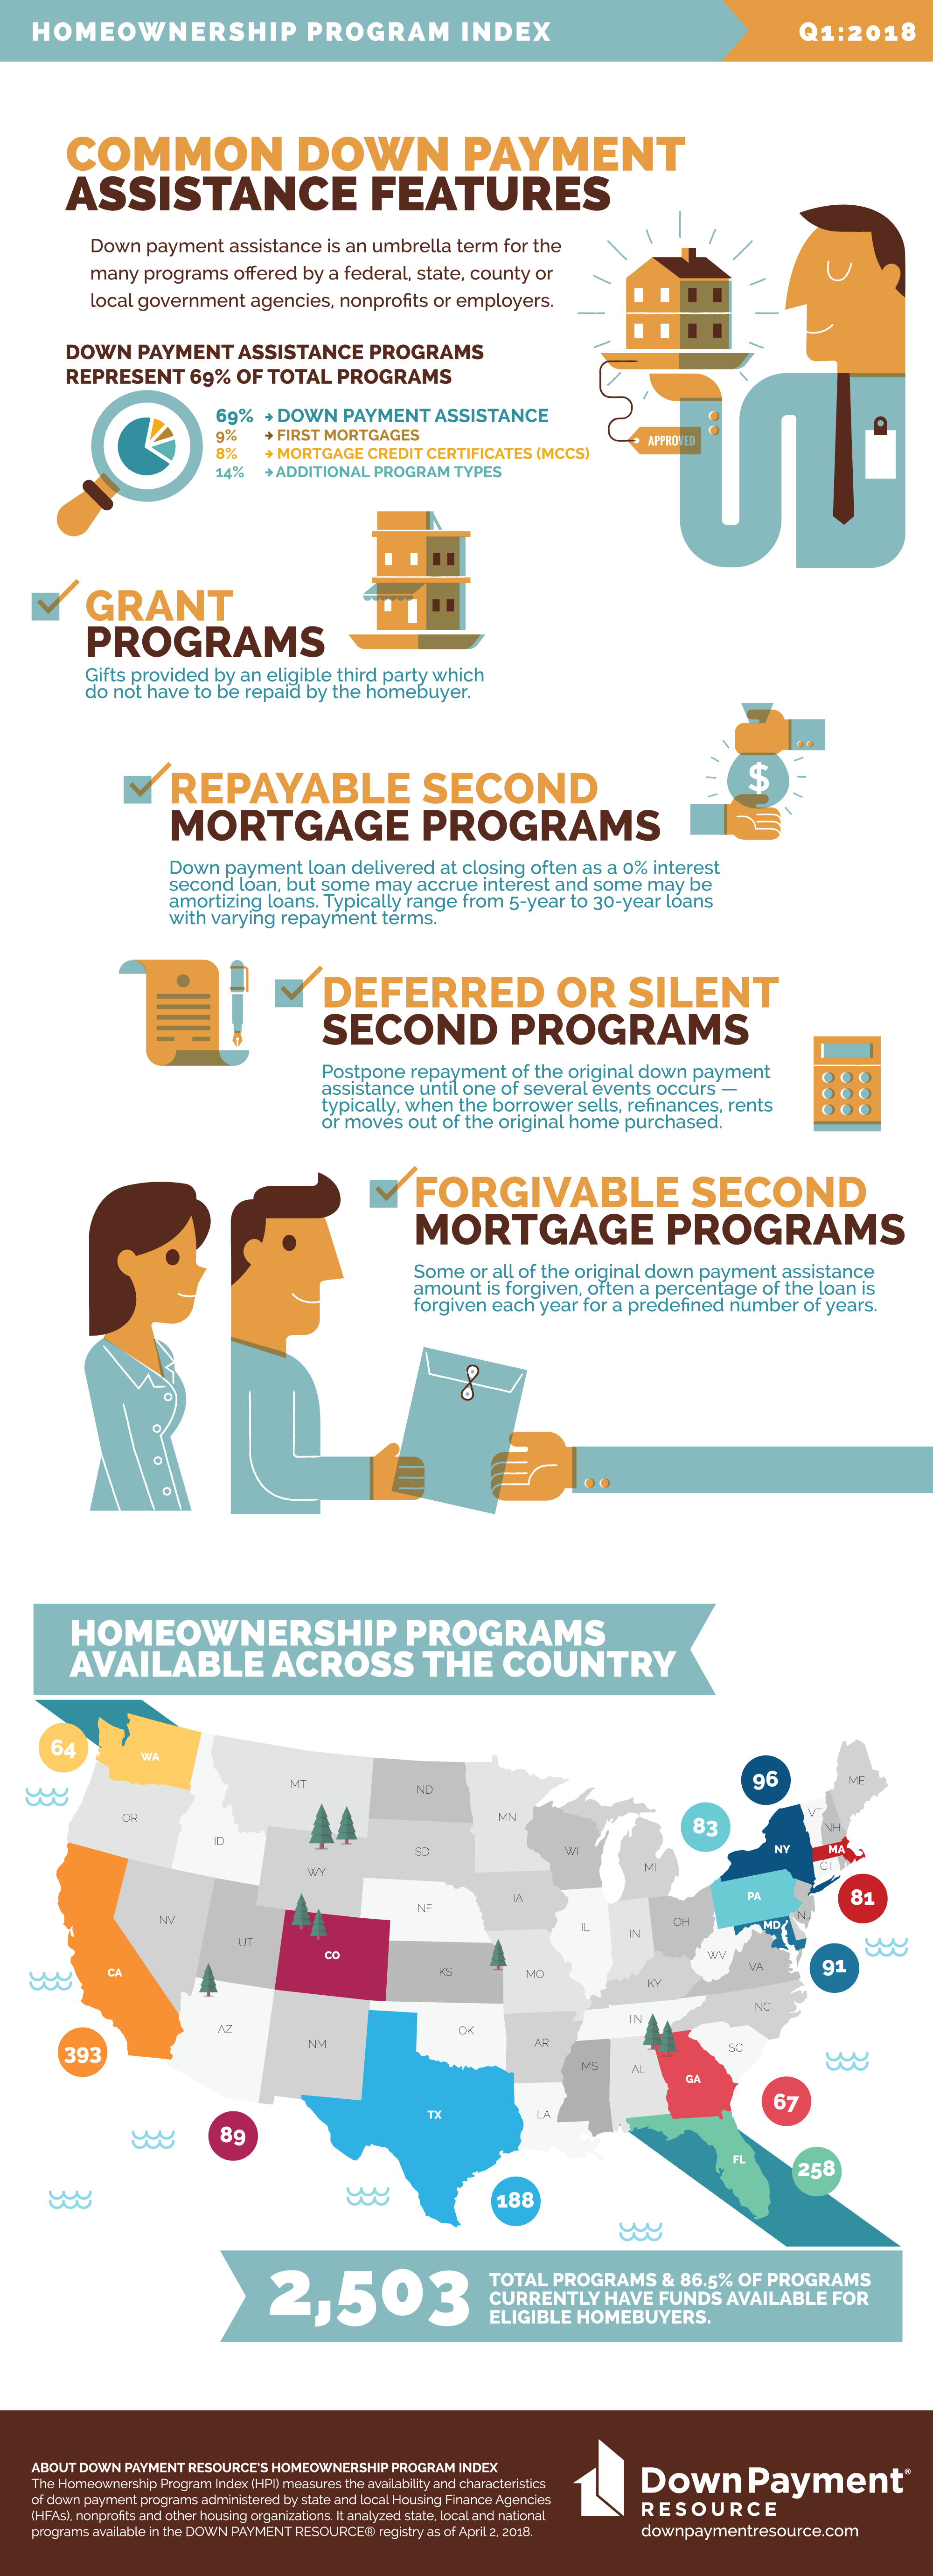 Down Payment Assistance Program Features Explained Down Payment Resource